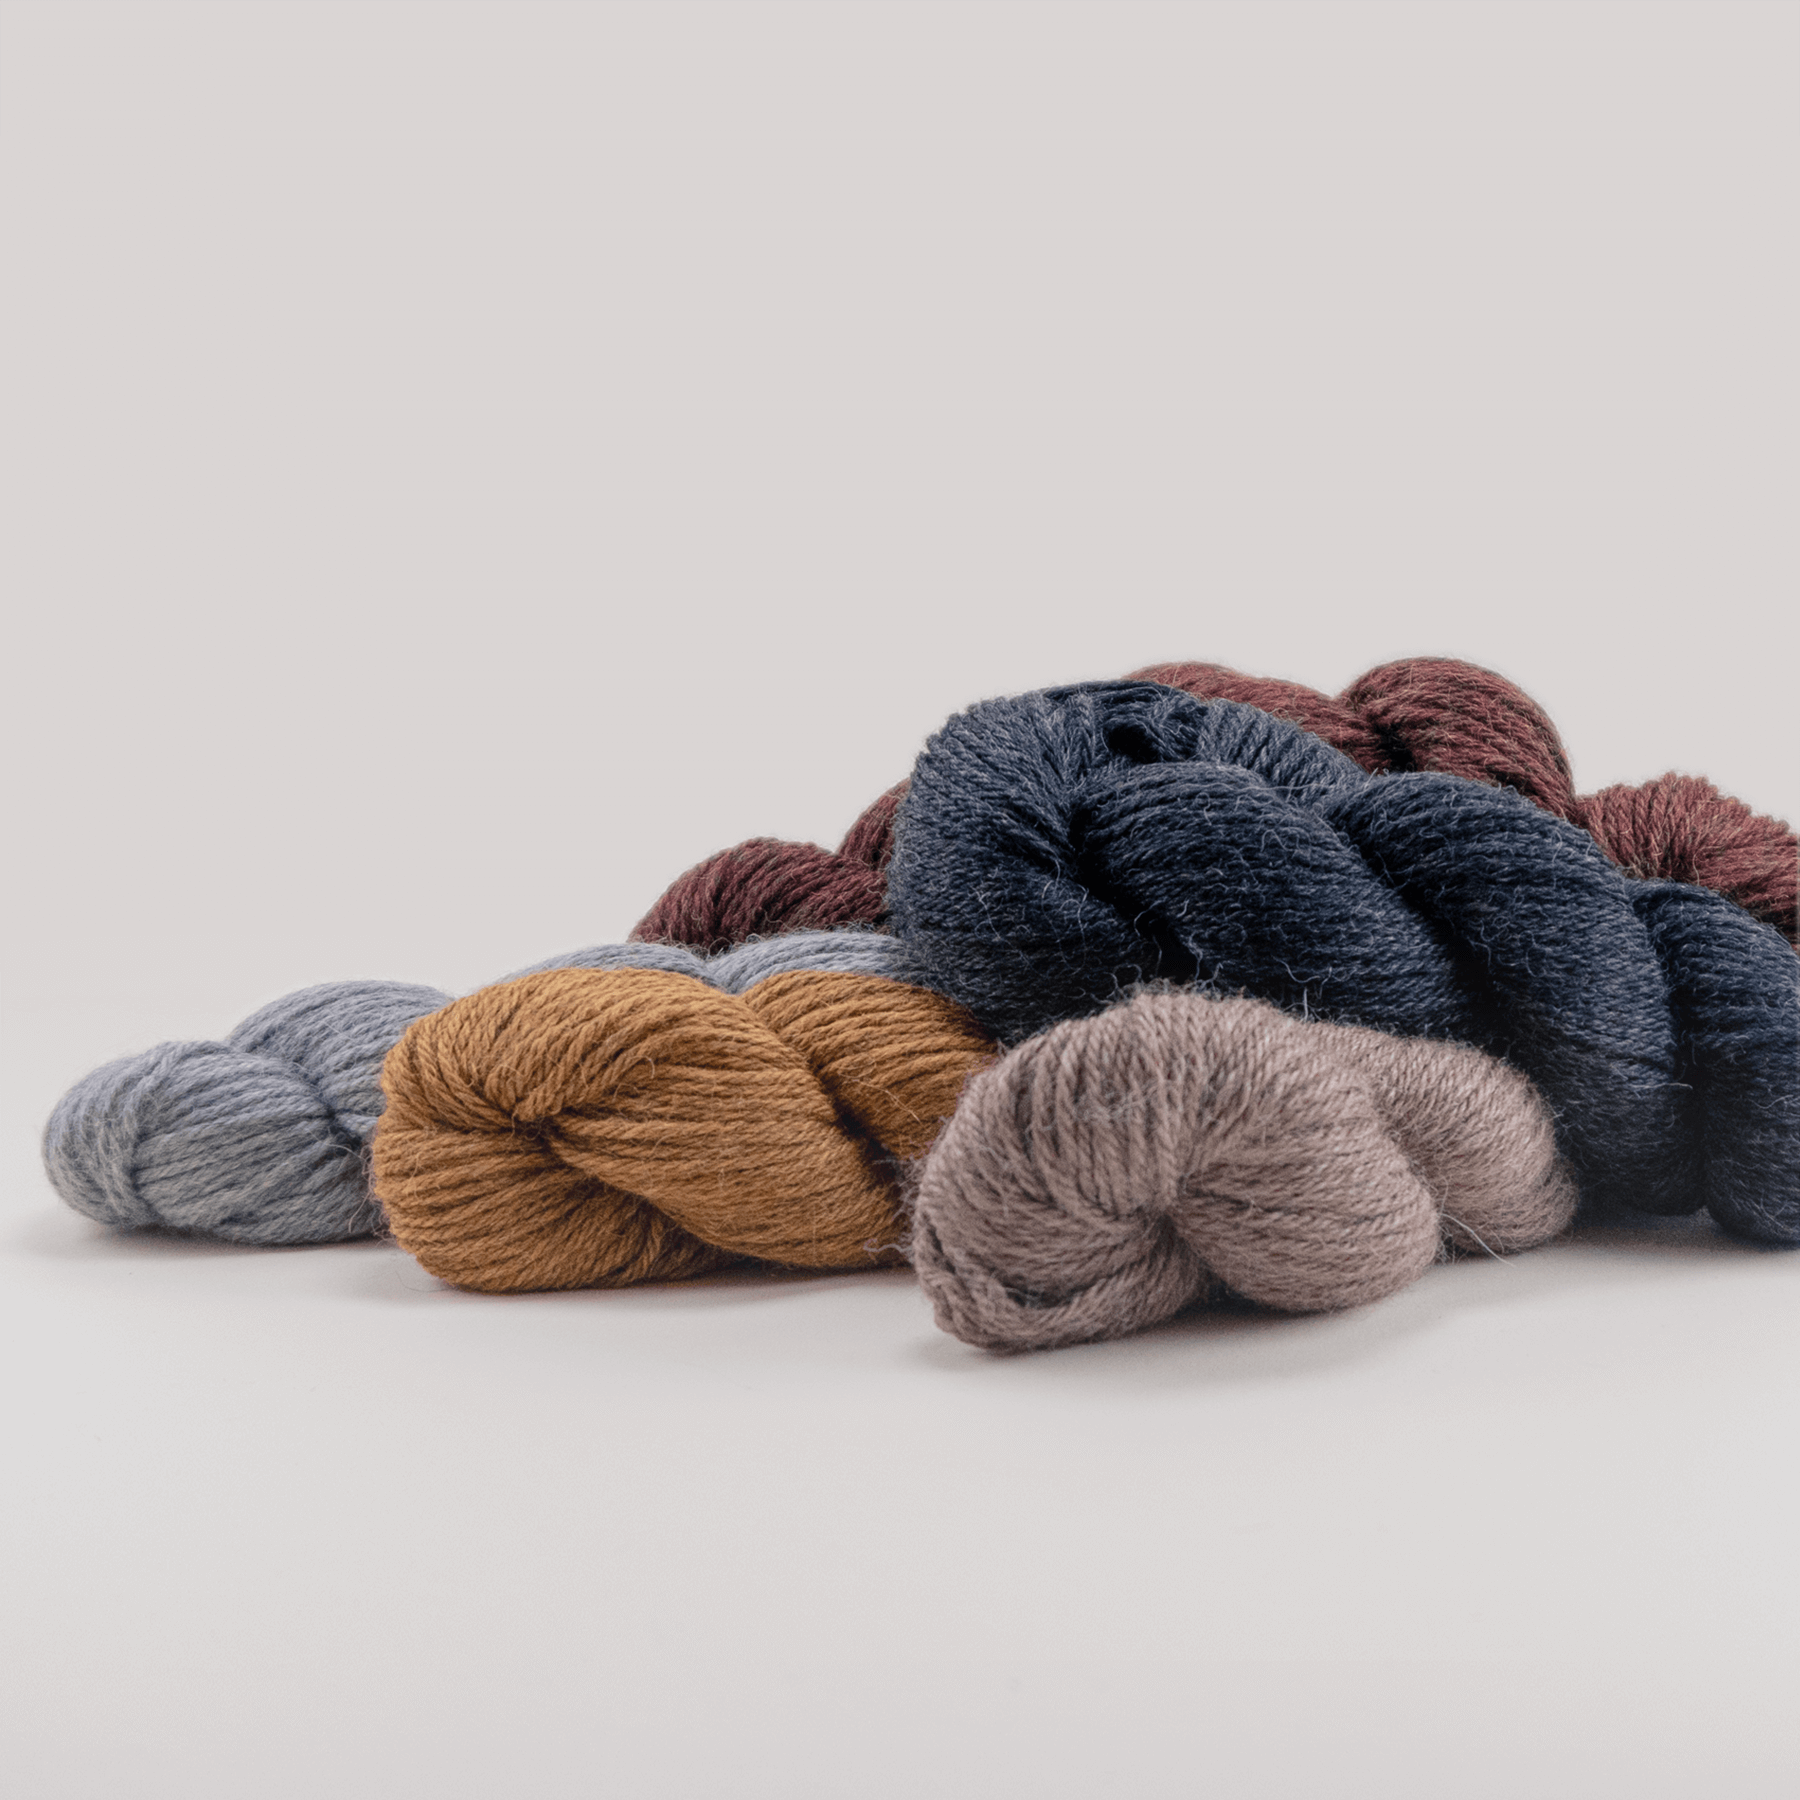 Pascuali - Knitting with luxury natural yarns from all over the world